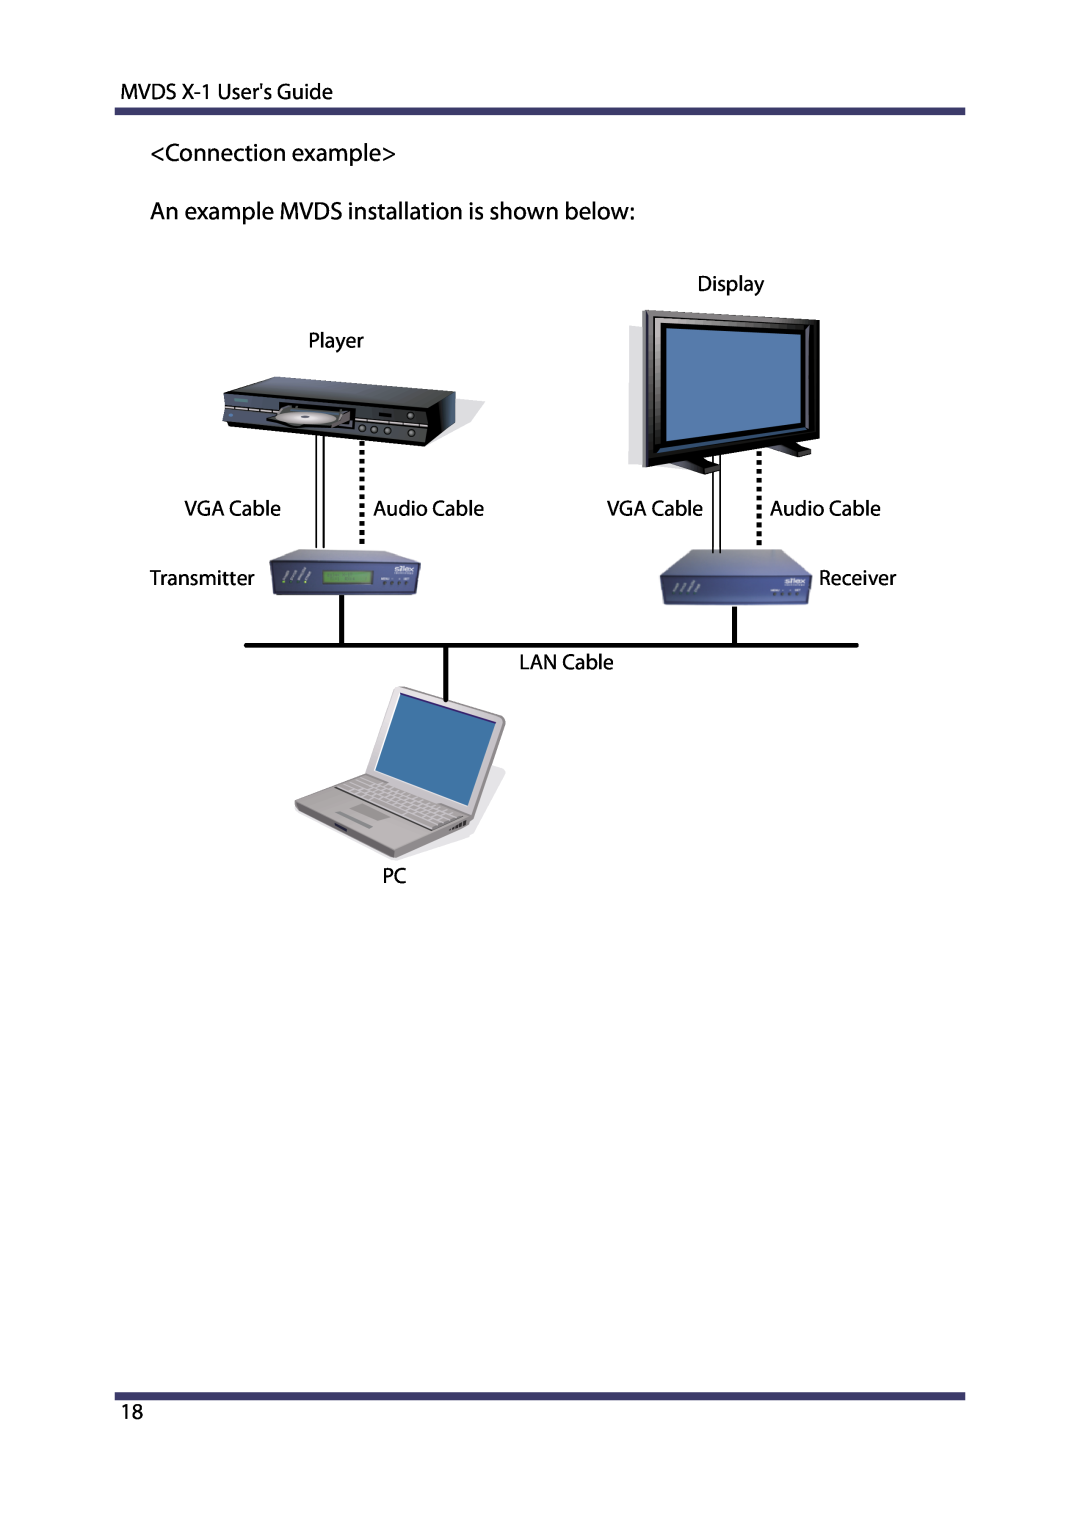 Silex technology Connection example, An example MVDS installation is shown below, MVDS X-1Users Guide, Display Player 